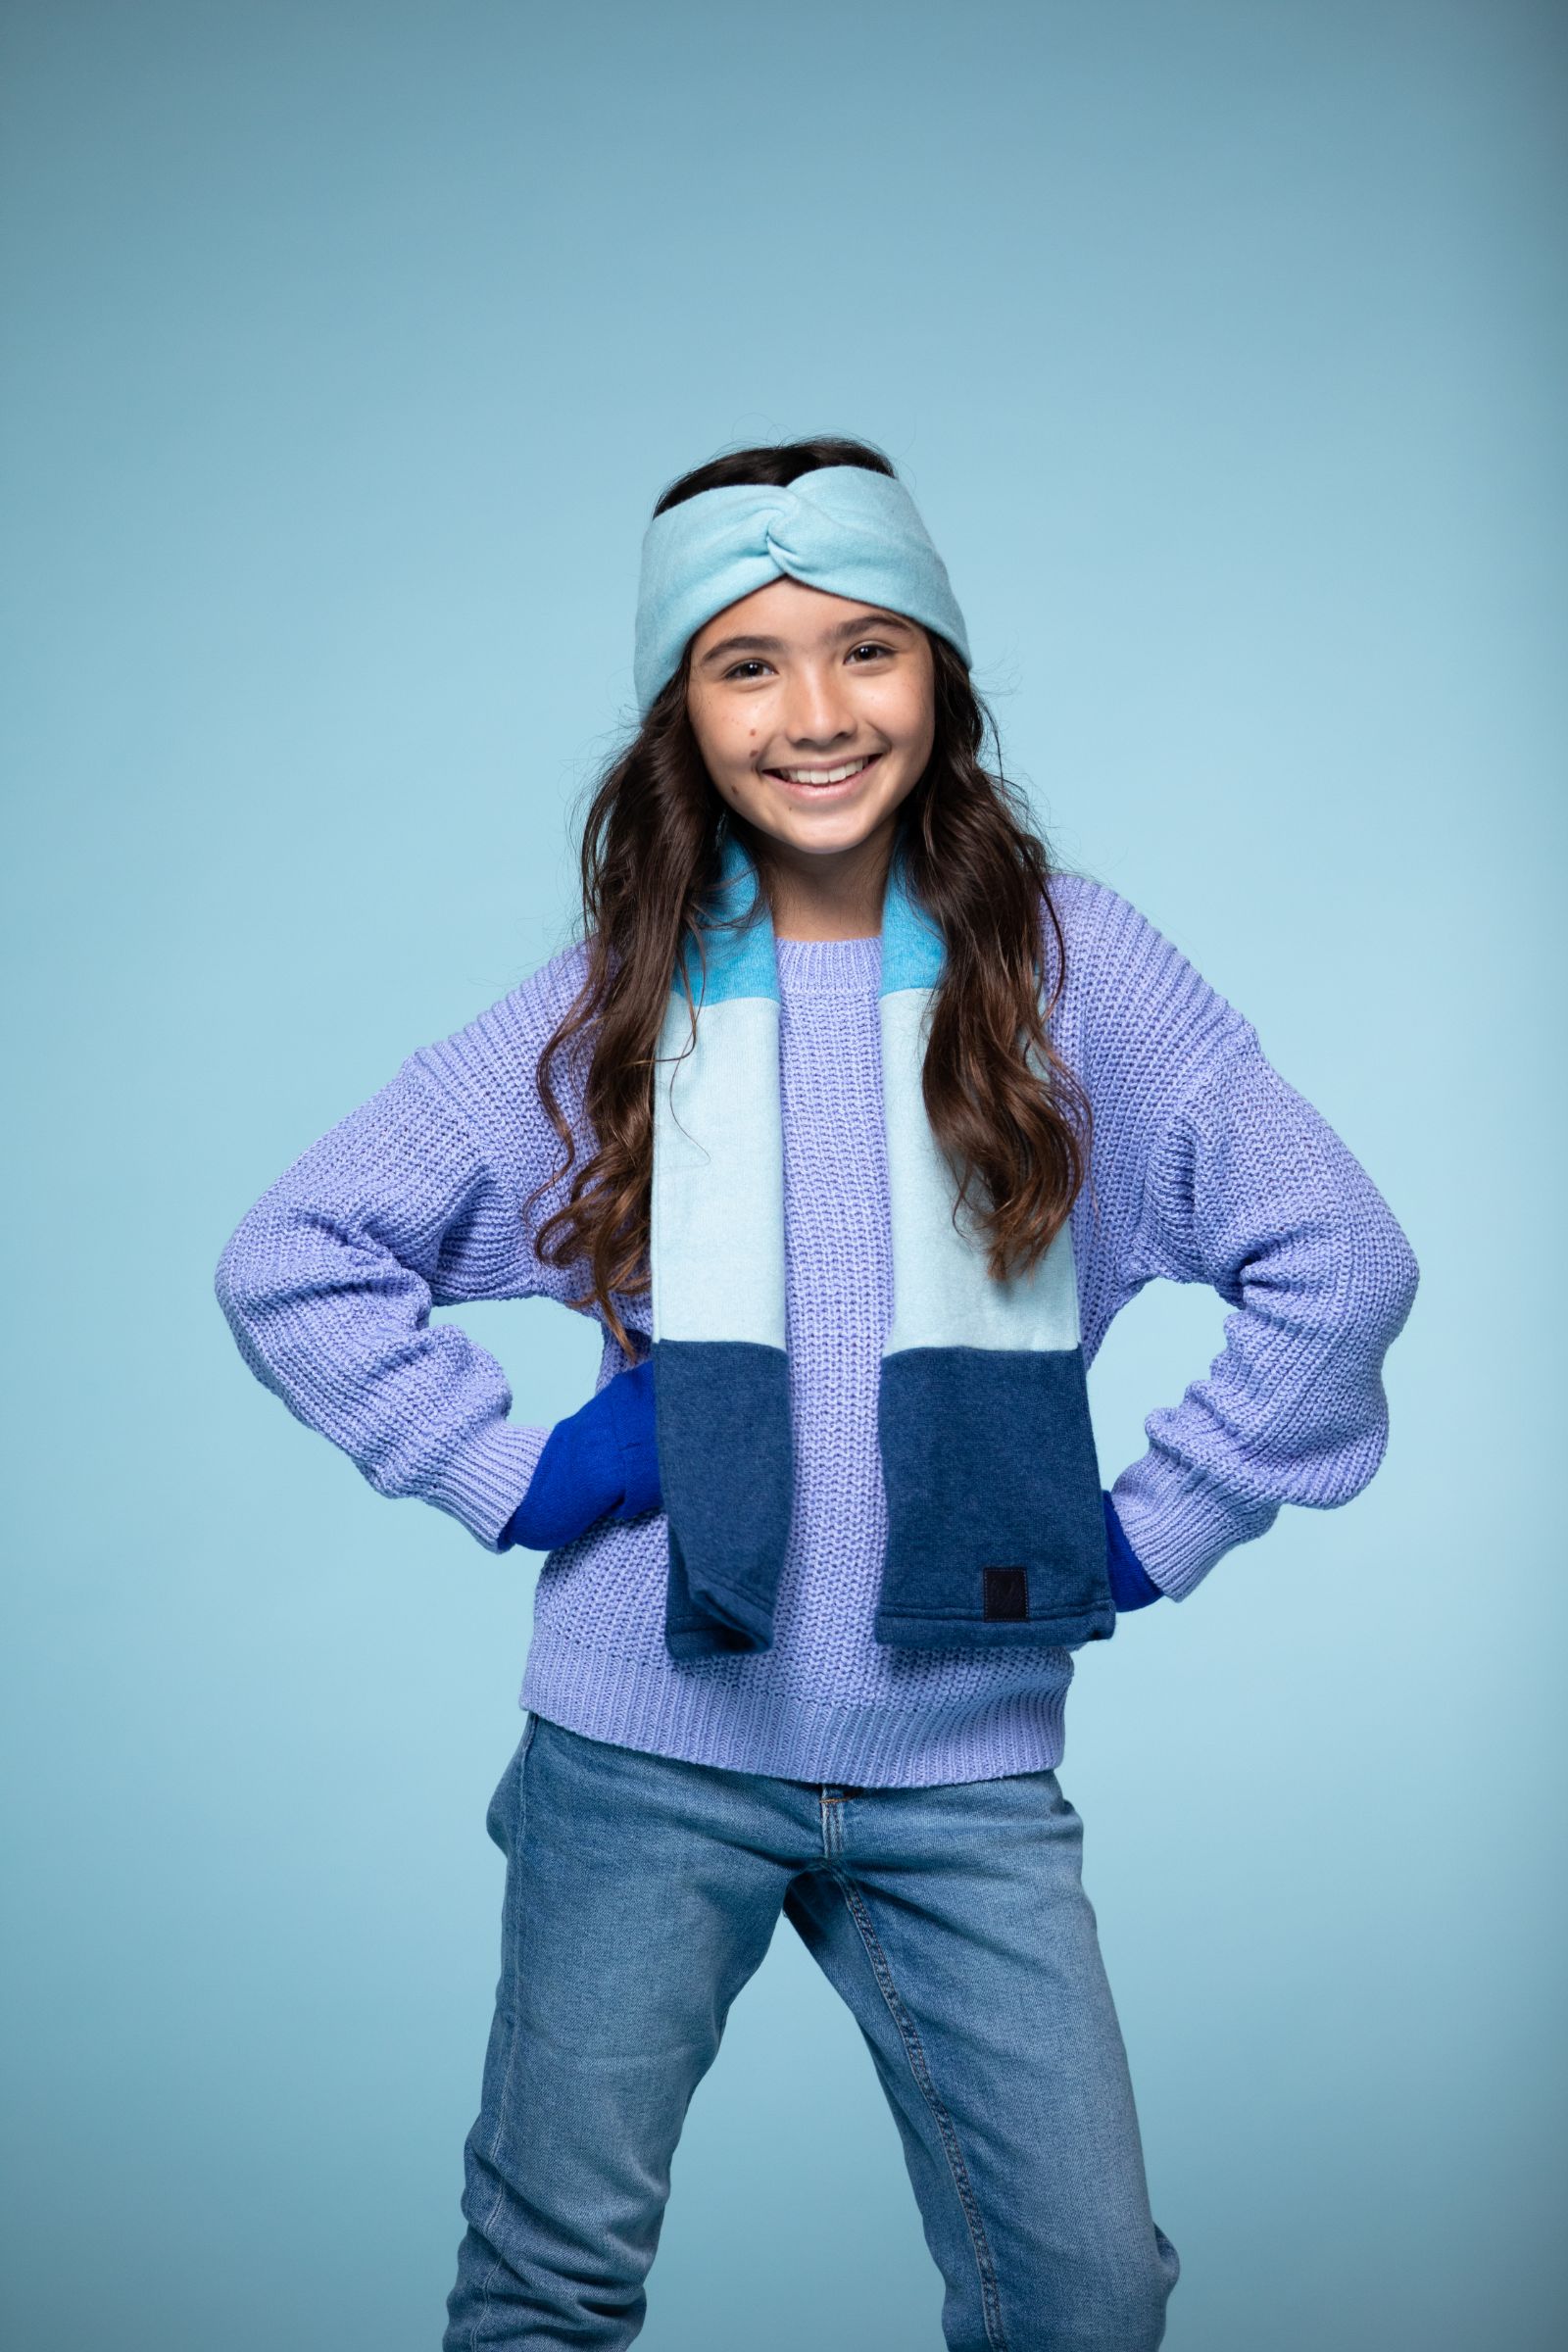 Girl model wearing a light blue head band, multicolored scarf, purple sweater and jeans smiling and posing for the camera against a light blue backdrop